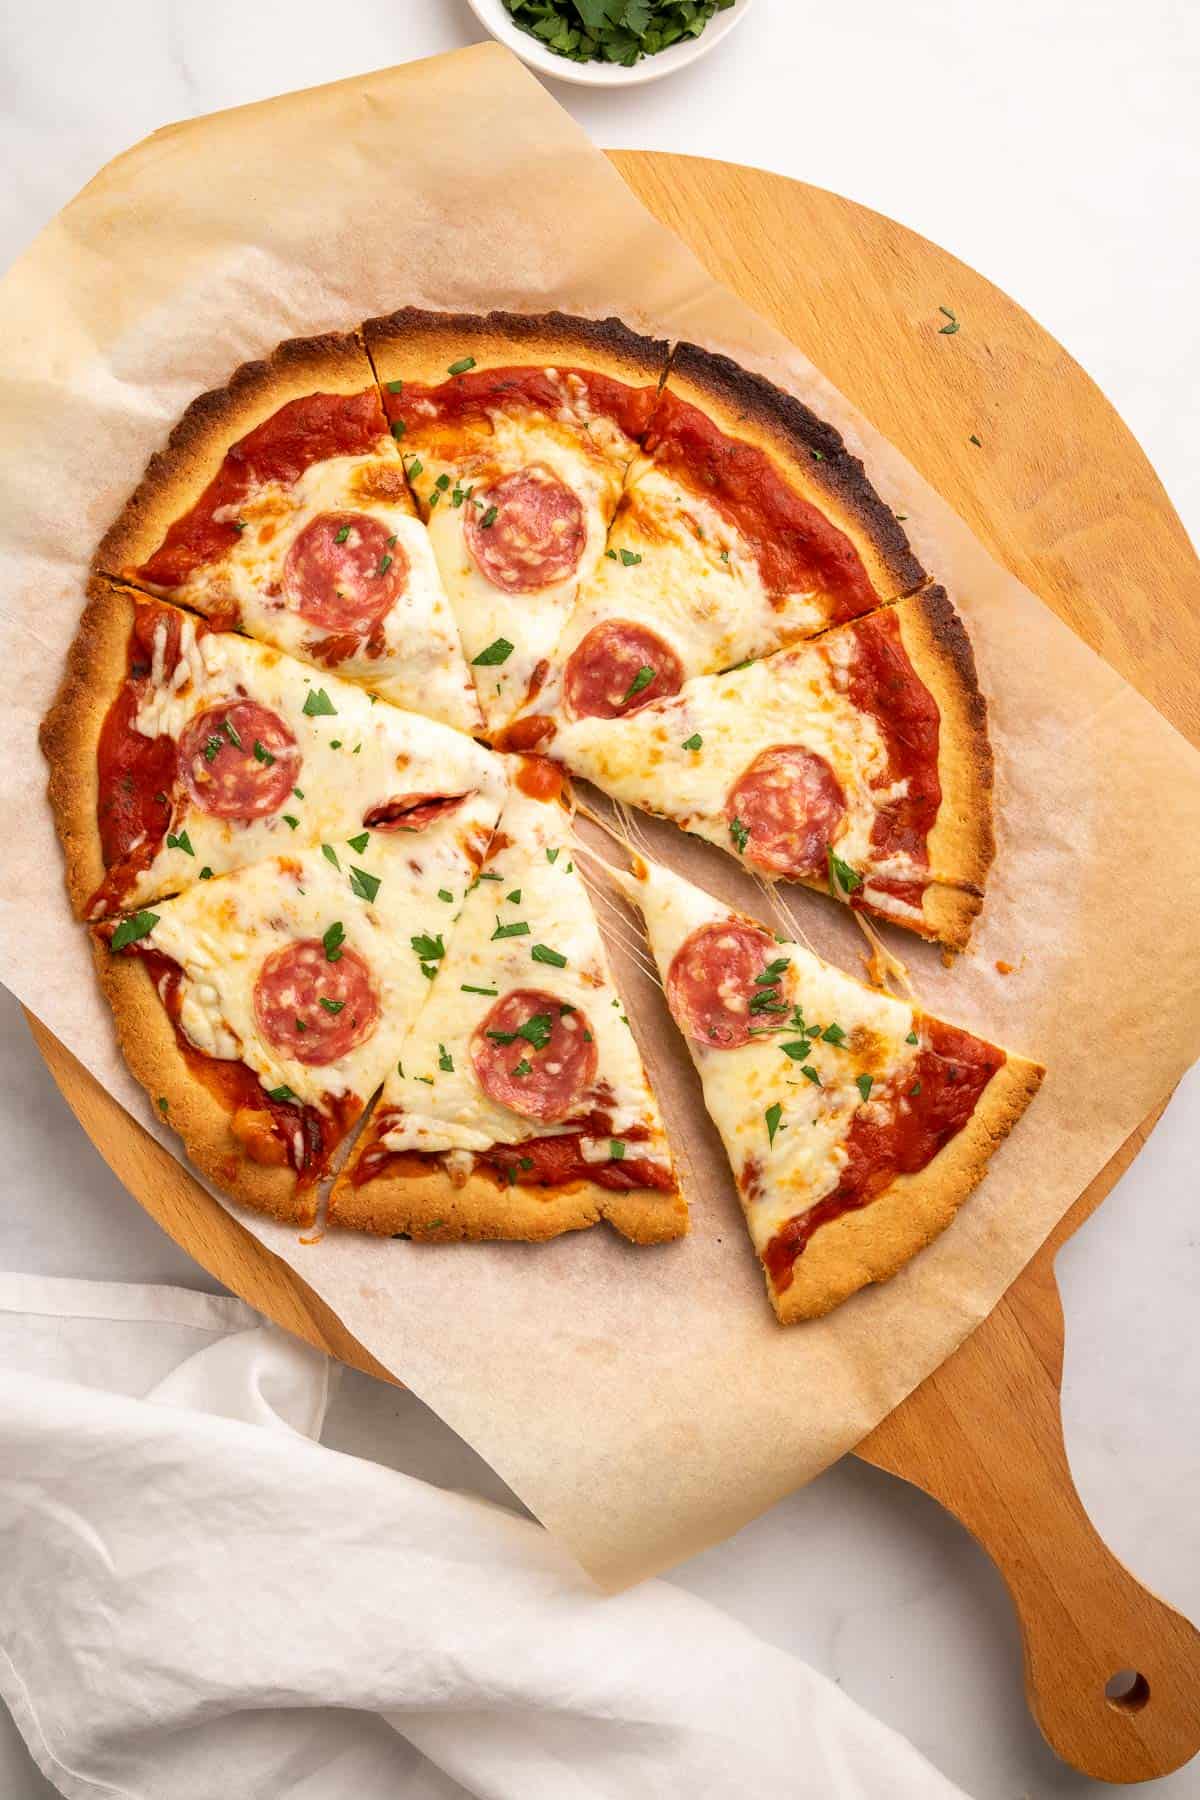 Pizza topped with sauce, cheese, pepperoni, and fresh parsley, cut into slices with one slice slightly separated from the rest